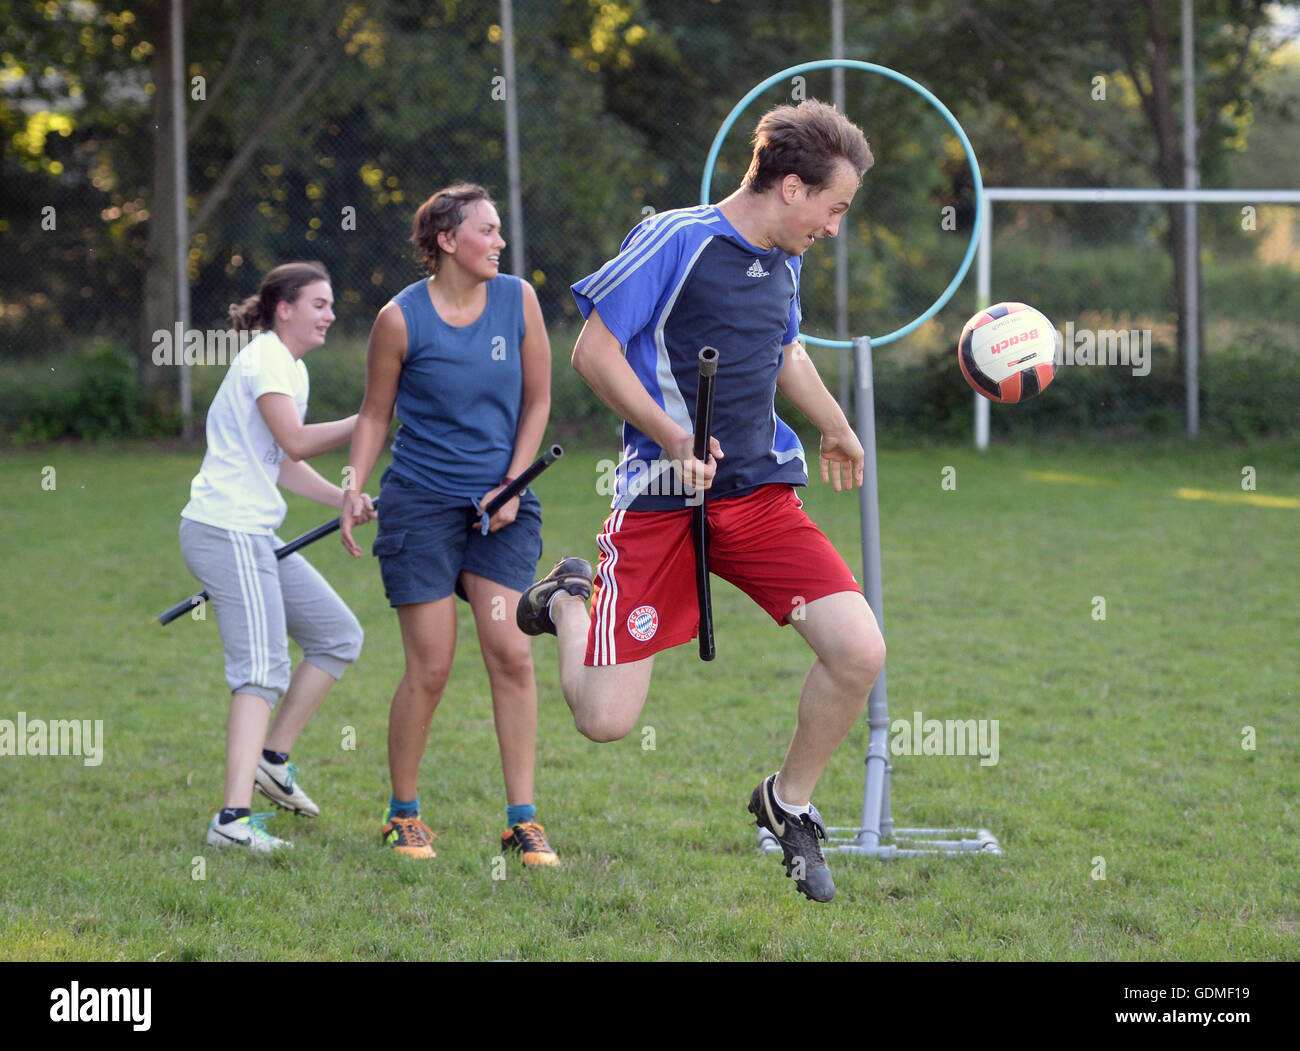 Freiburg, Germany. 23rd June, 2016. Quidditch players practise in Freiburg, Germany, 23 June 2016. The game originates from the Harry Potter books and is a mixture of handball, dodgeball and rugby. The Quidditch elites meet in Frankfurt on the Main on 23-24 July for the Quidditch World Championships. Foto: Patrick Seeger/dpa/Alamy Live News Stock Photo